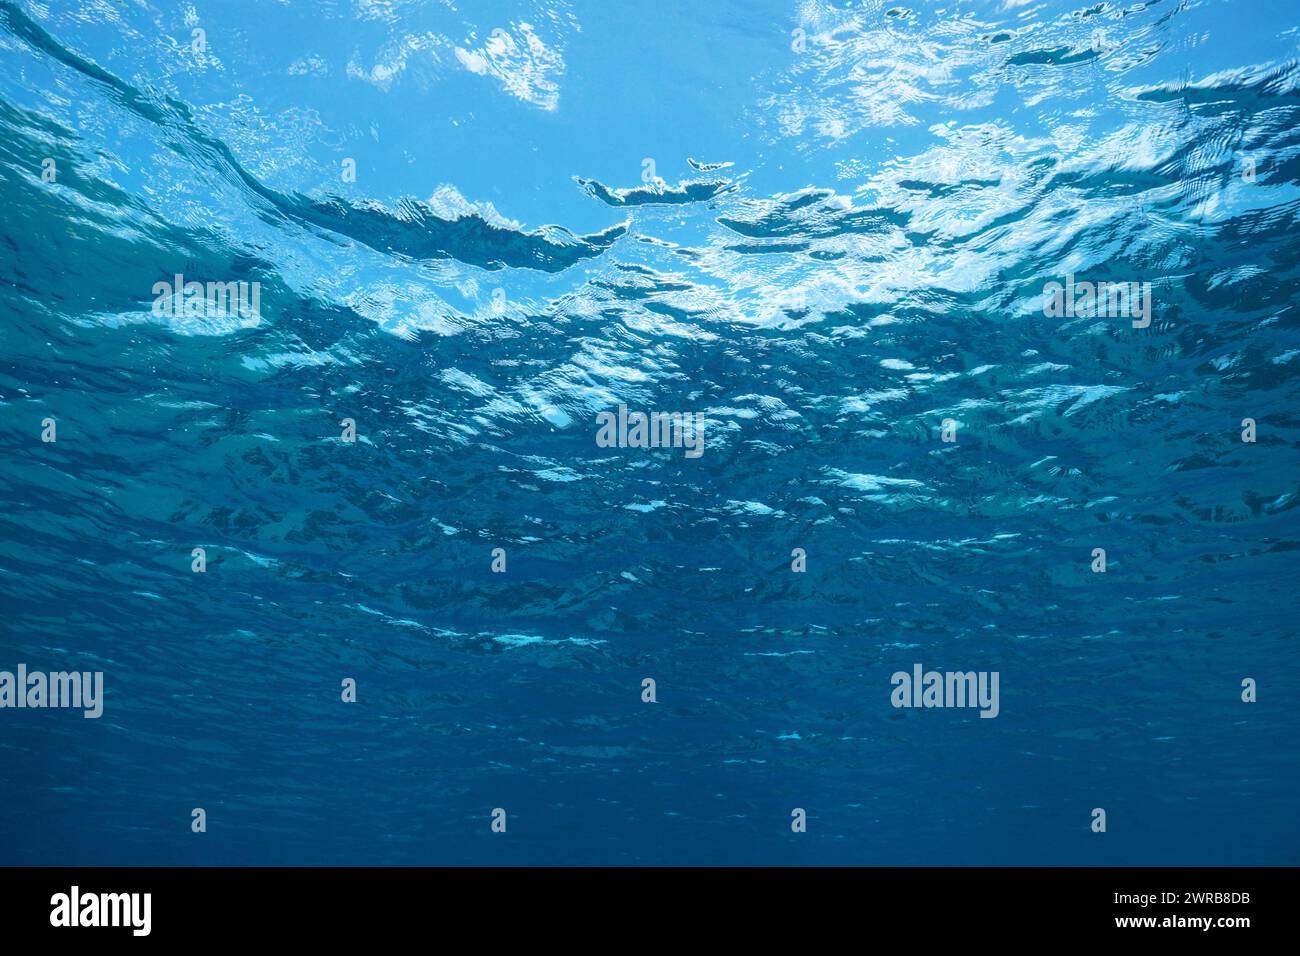 Water surface from underwater in the sea, natural scene, Mediterranean sea, France Stock Photo